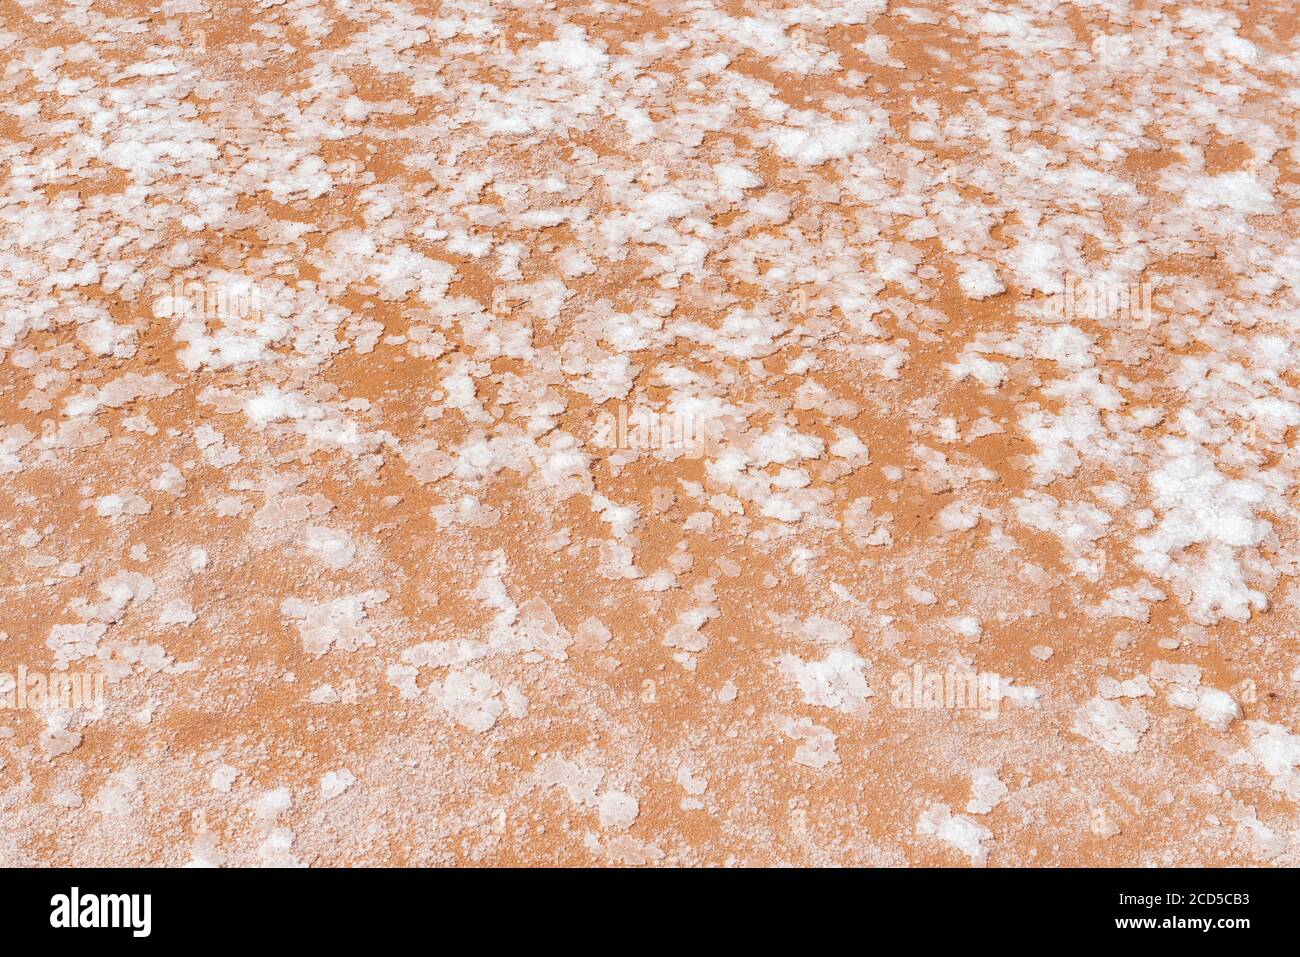 Close up of the best and highest salt quality, a thin crust floating in the salt terraces and ponds of Maras called Fleur de Sel, Cusco province, Peru Stock Photo